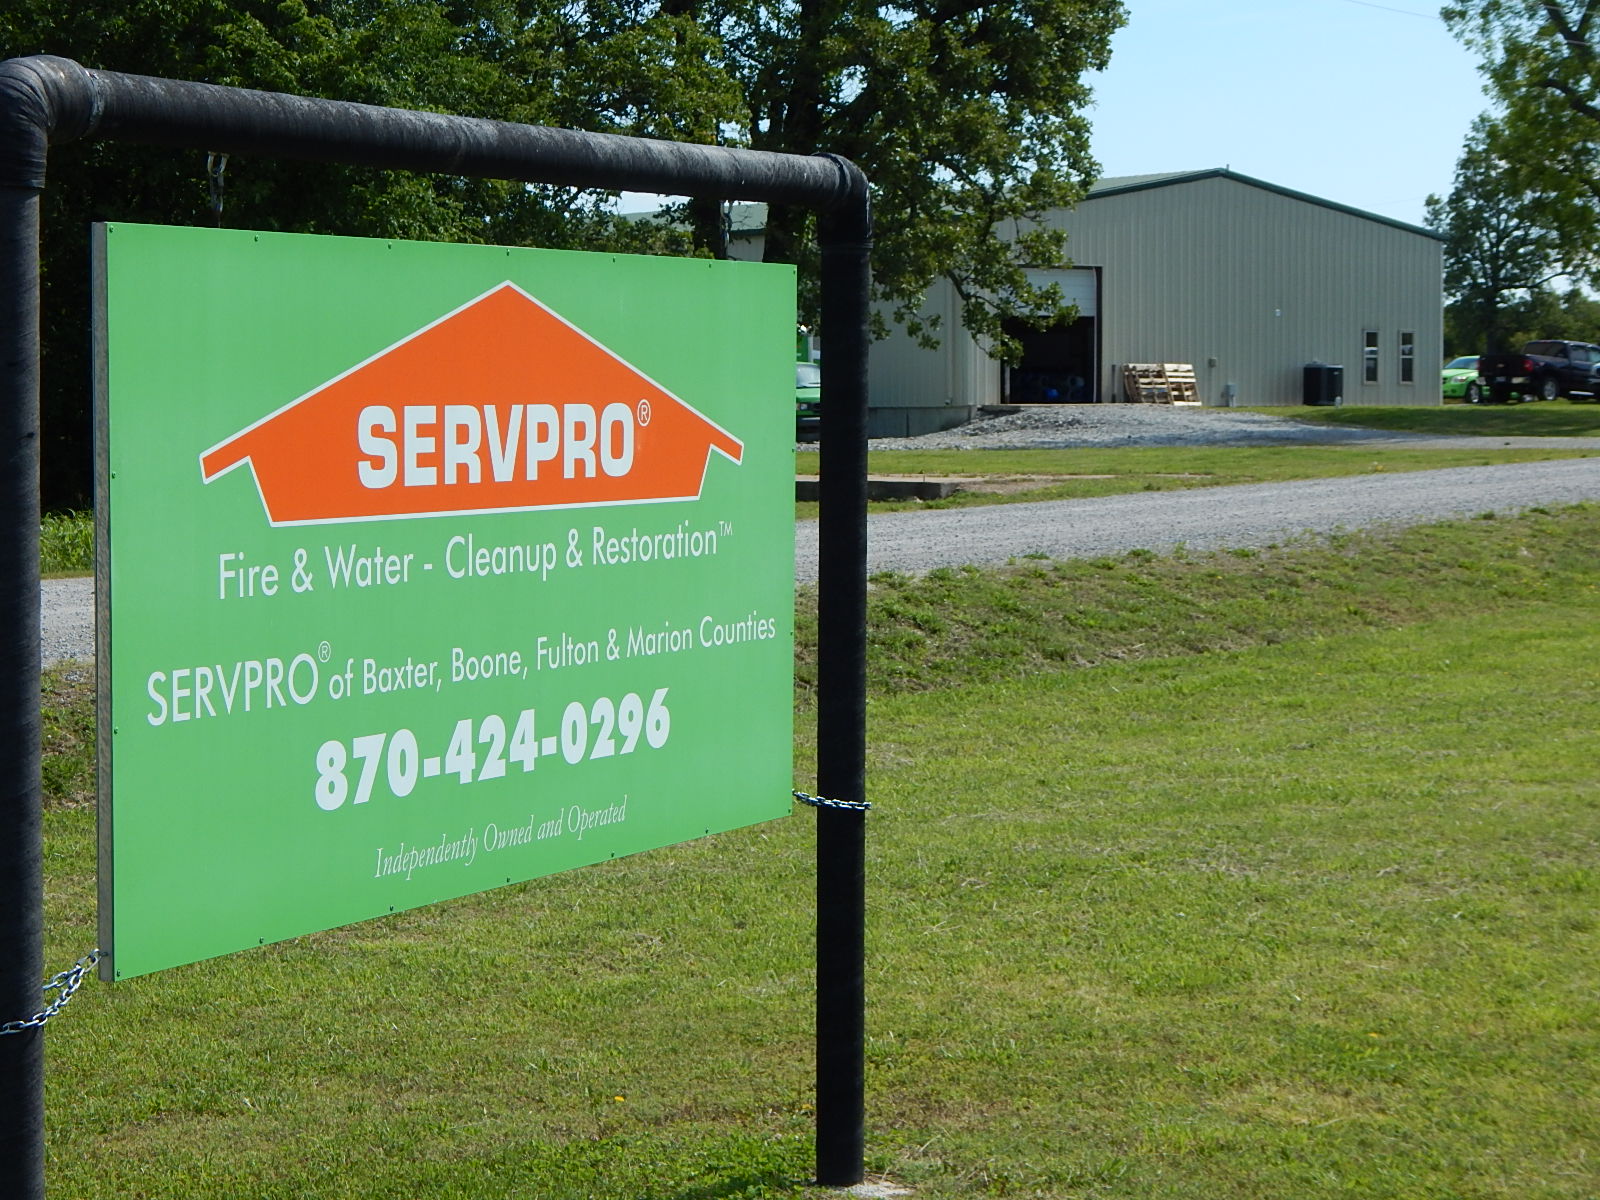 SERVPRO of Baxter, Boone, Fulton & Marion Counties located in Mountain Home, AR has a 12,000sq. ft. building on 16 acres of land.